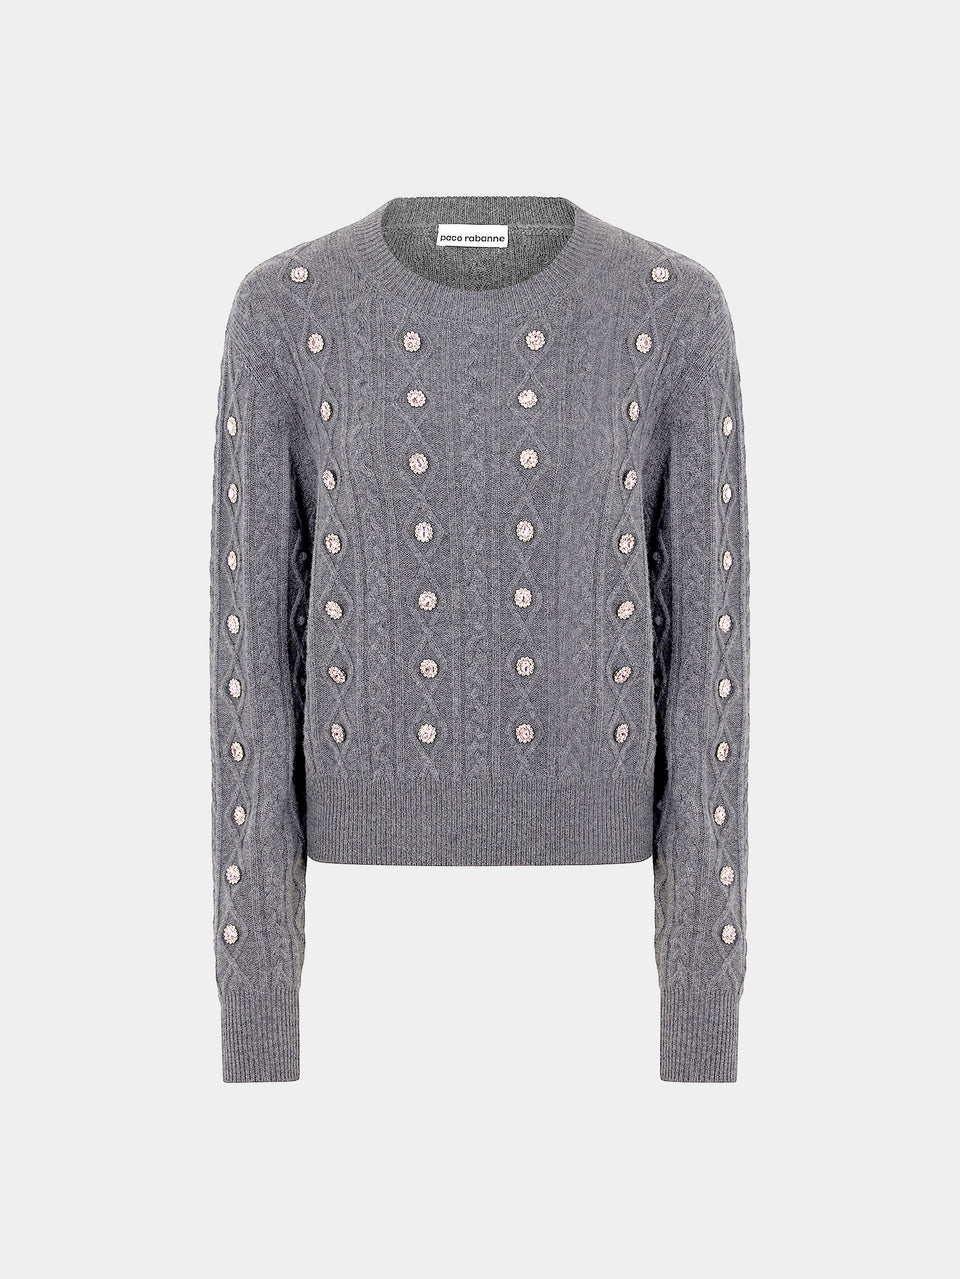 Wool and cashmere sweater adorned with crystals